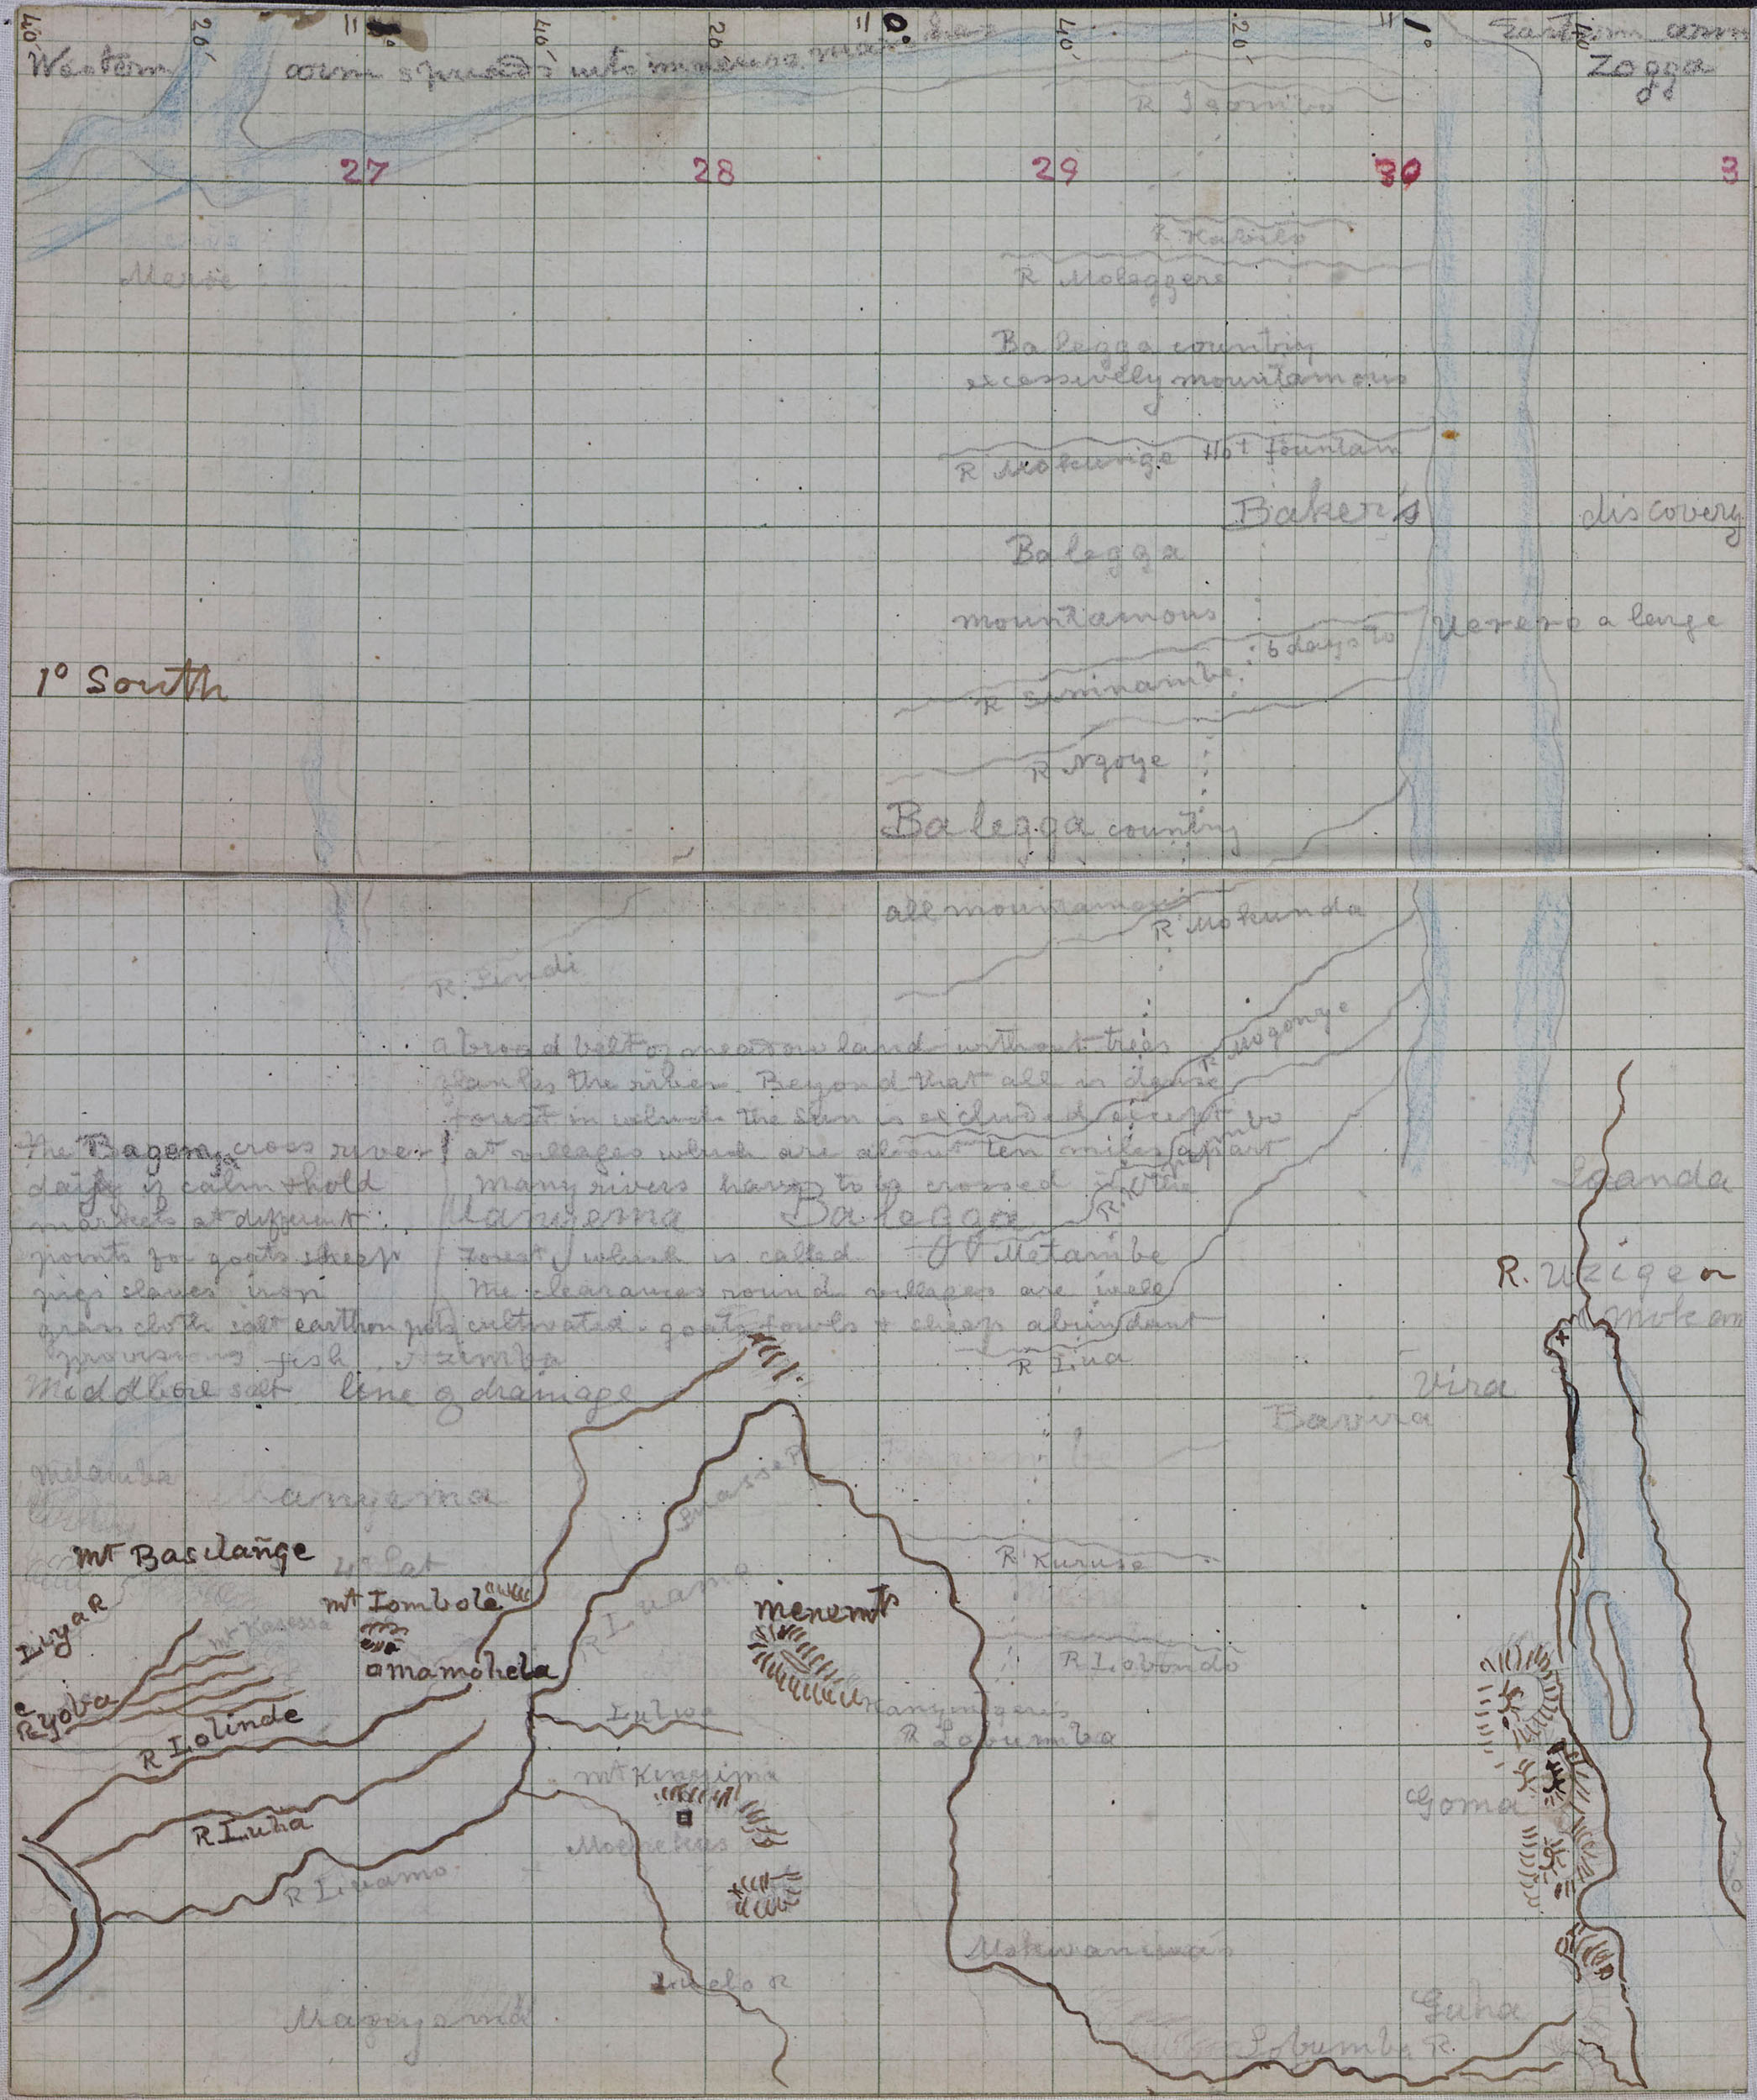 A segment of Livingstone's Map of Central African Lakes [1869], [1]. Copyright National Library of Scotland and, as relevant, Neil Imray Livingstone Wilson. Creative Commons Share-alike 2.5 UK: Scotland (https://creativecommons.org/licenses/by-nc-sa/2.5/scotland/).